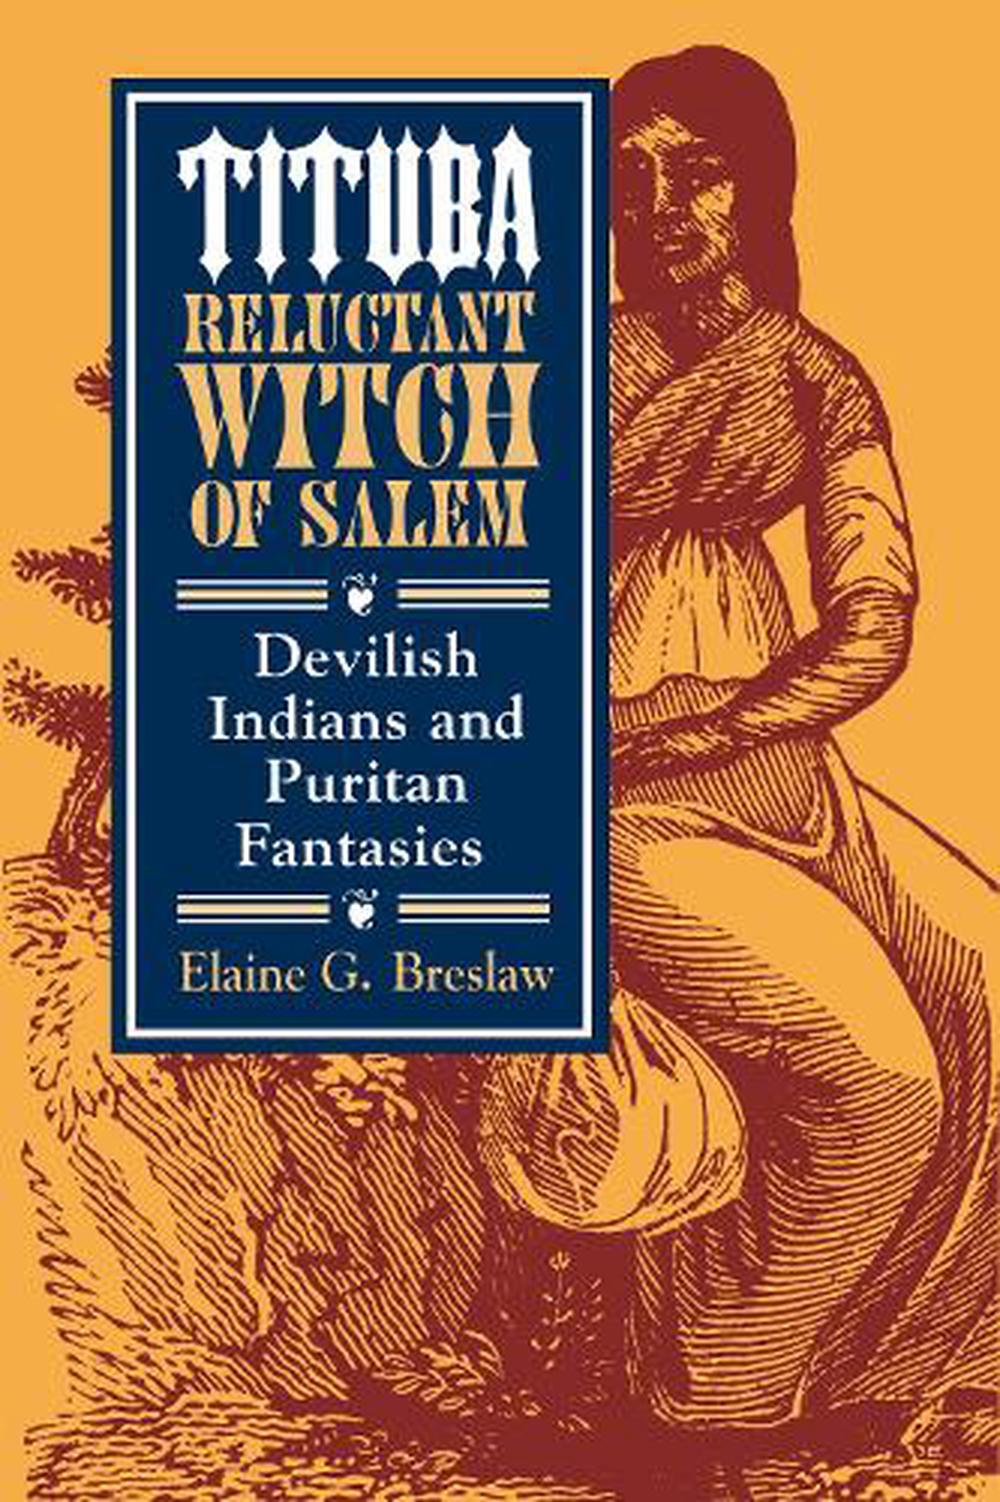 Tituba, Reluctant Witch of Salem by Elaine G. Breslaw